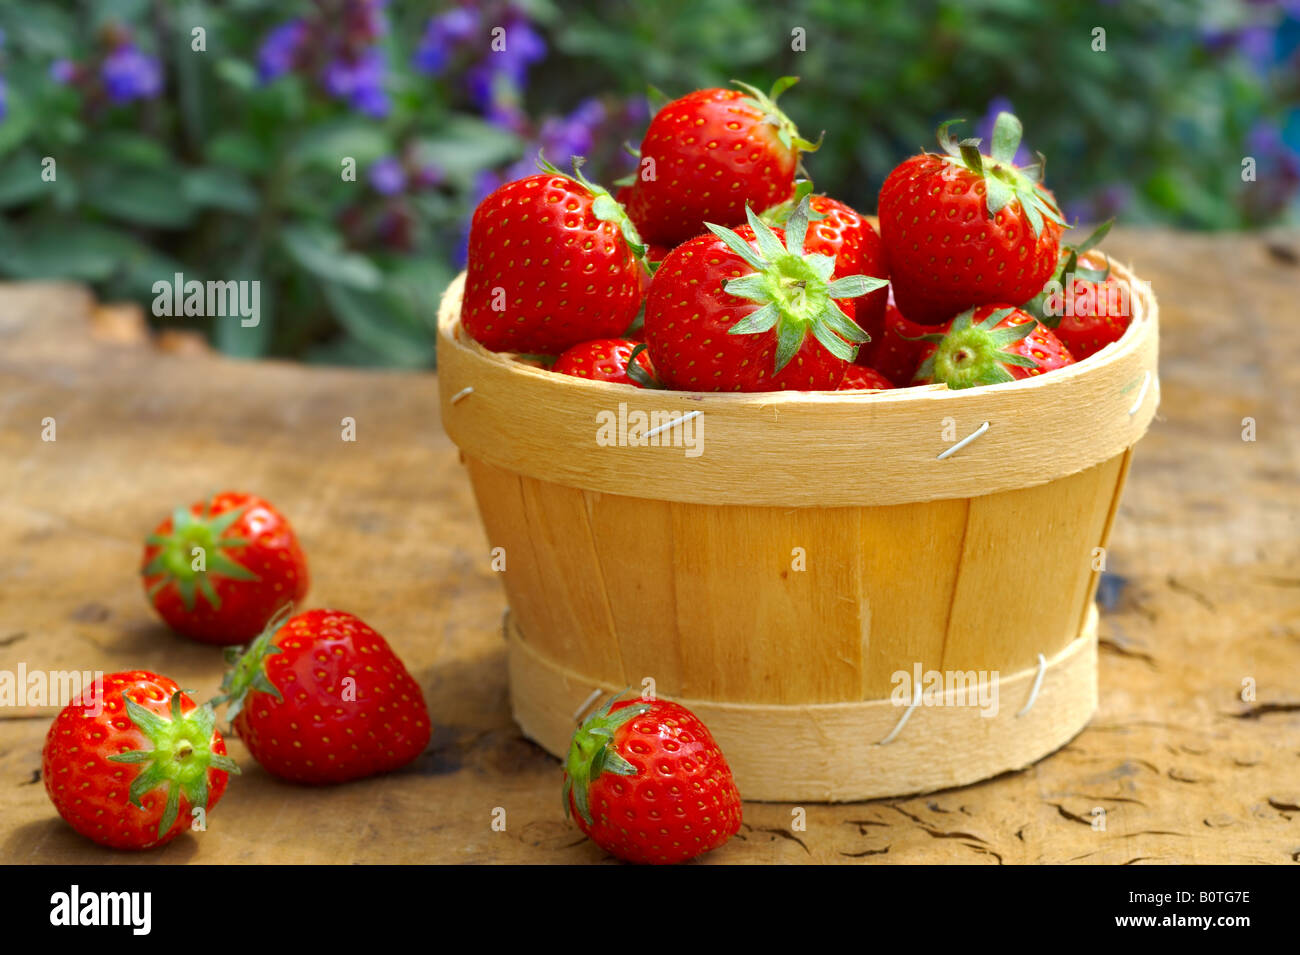 Summer fruits - fresh picked Organic strawberries in a fruit basket on a wooden garden table in a garden Stock Photo